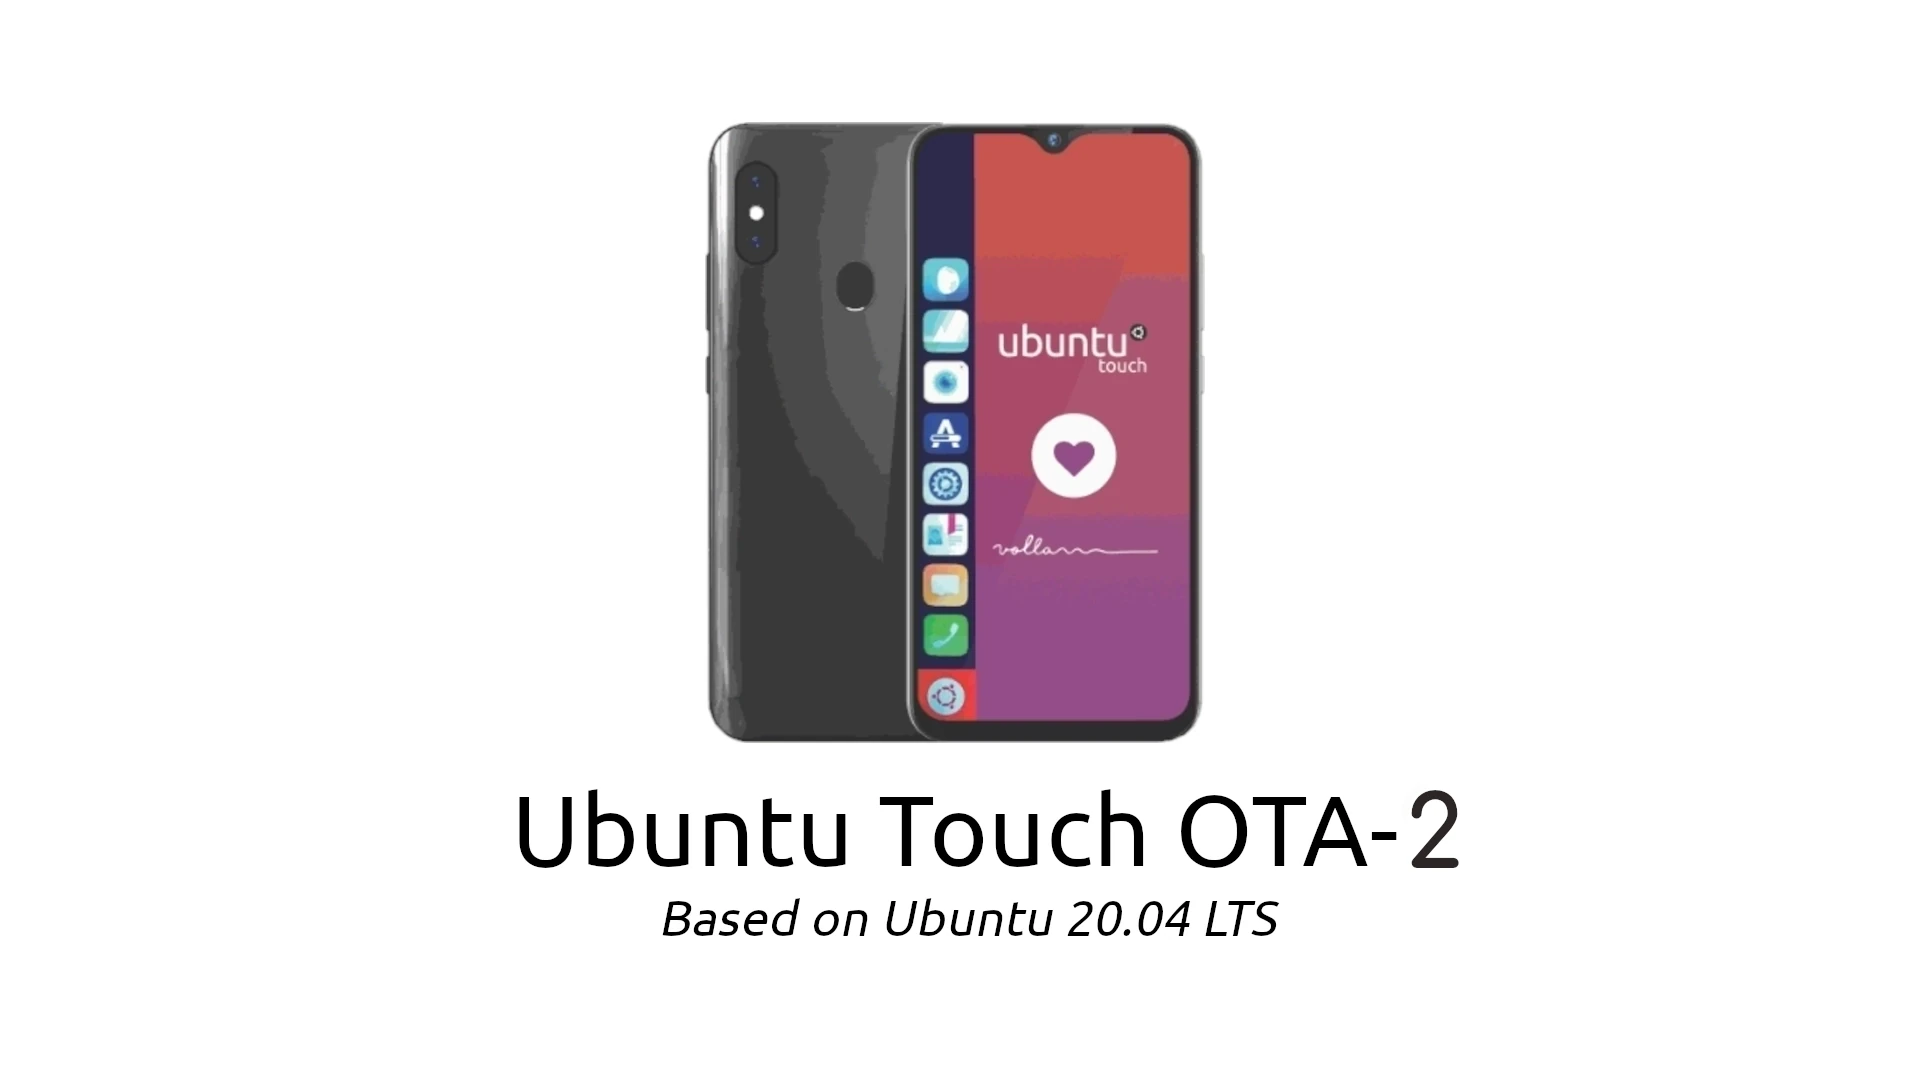 Ubuntu Touch OTA-2 Rolls Out with Support for Fairphone 3, F(x)tec Pro1 X